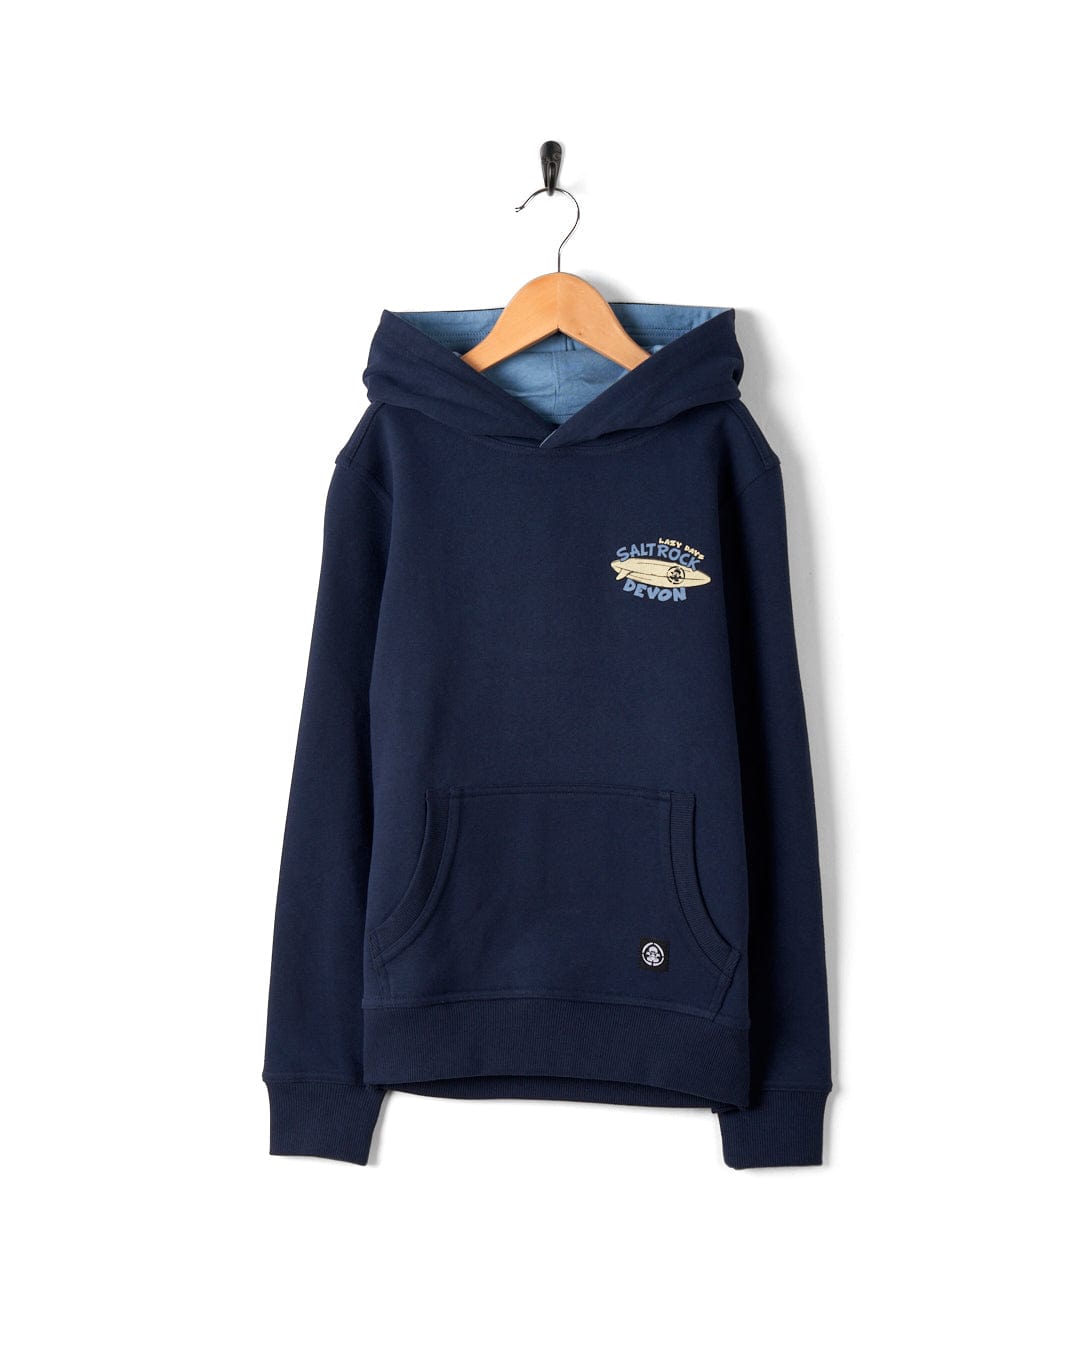 A navy blue Saltrock branded Lazy Location Wales - Recycled Kids Hoodie - Blue with a front pocket and logo embroidery, hanging on a wooden hanger against a white background.